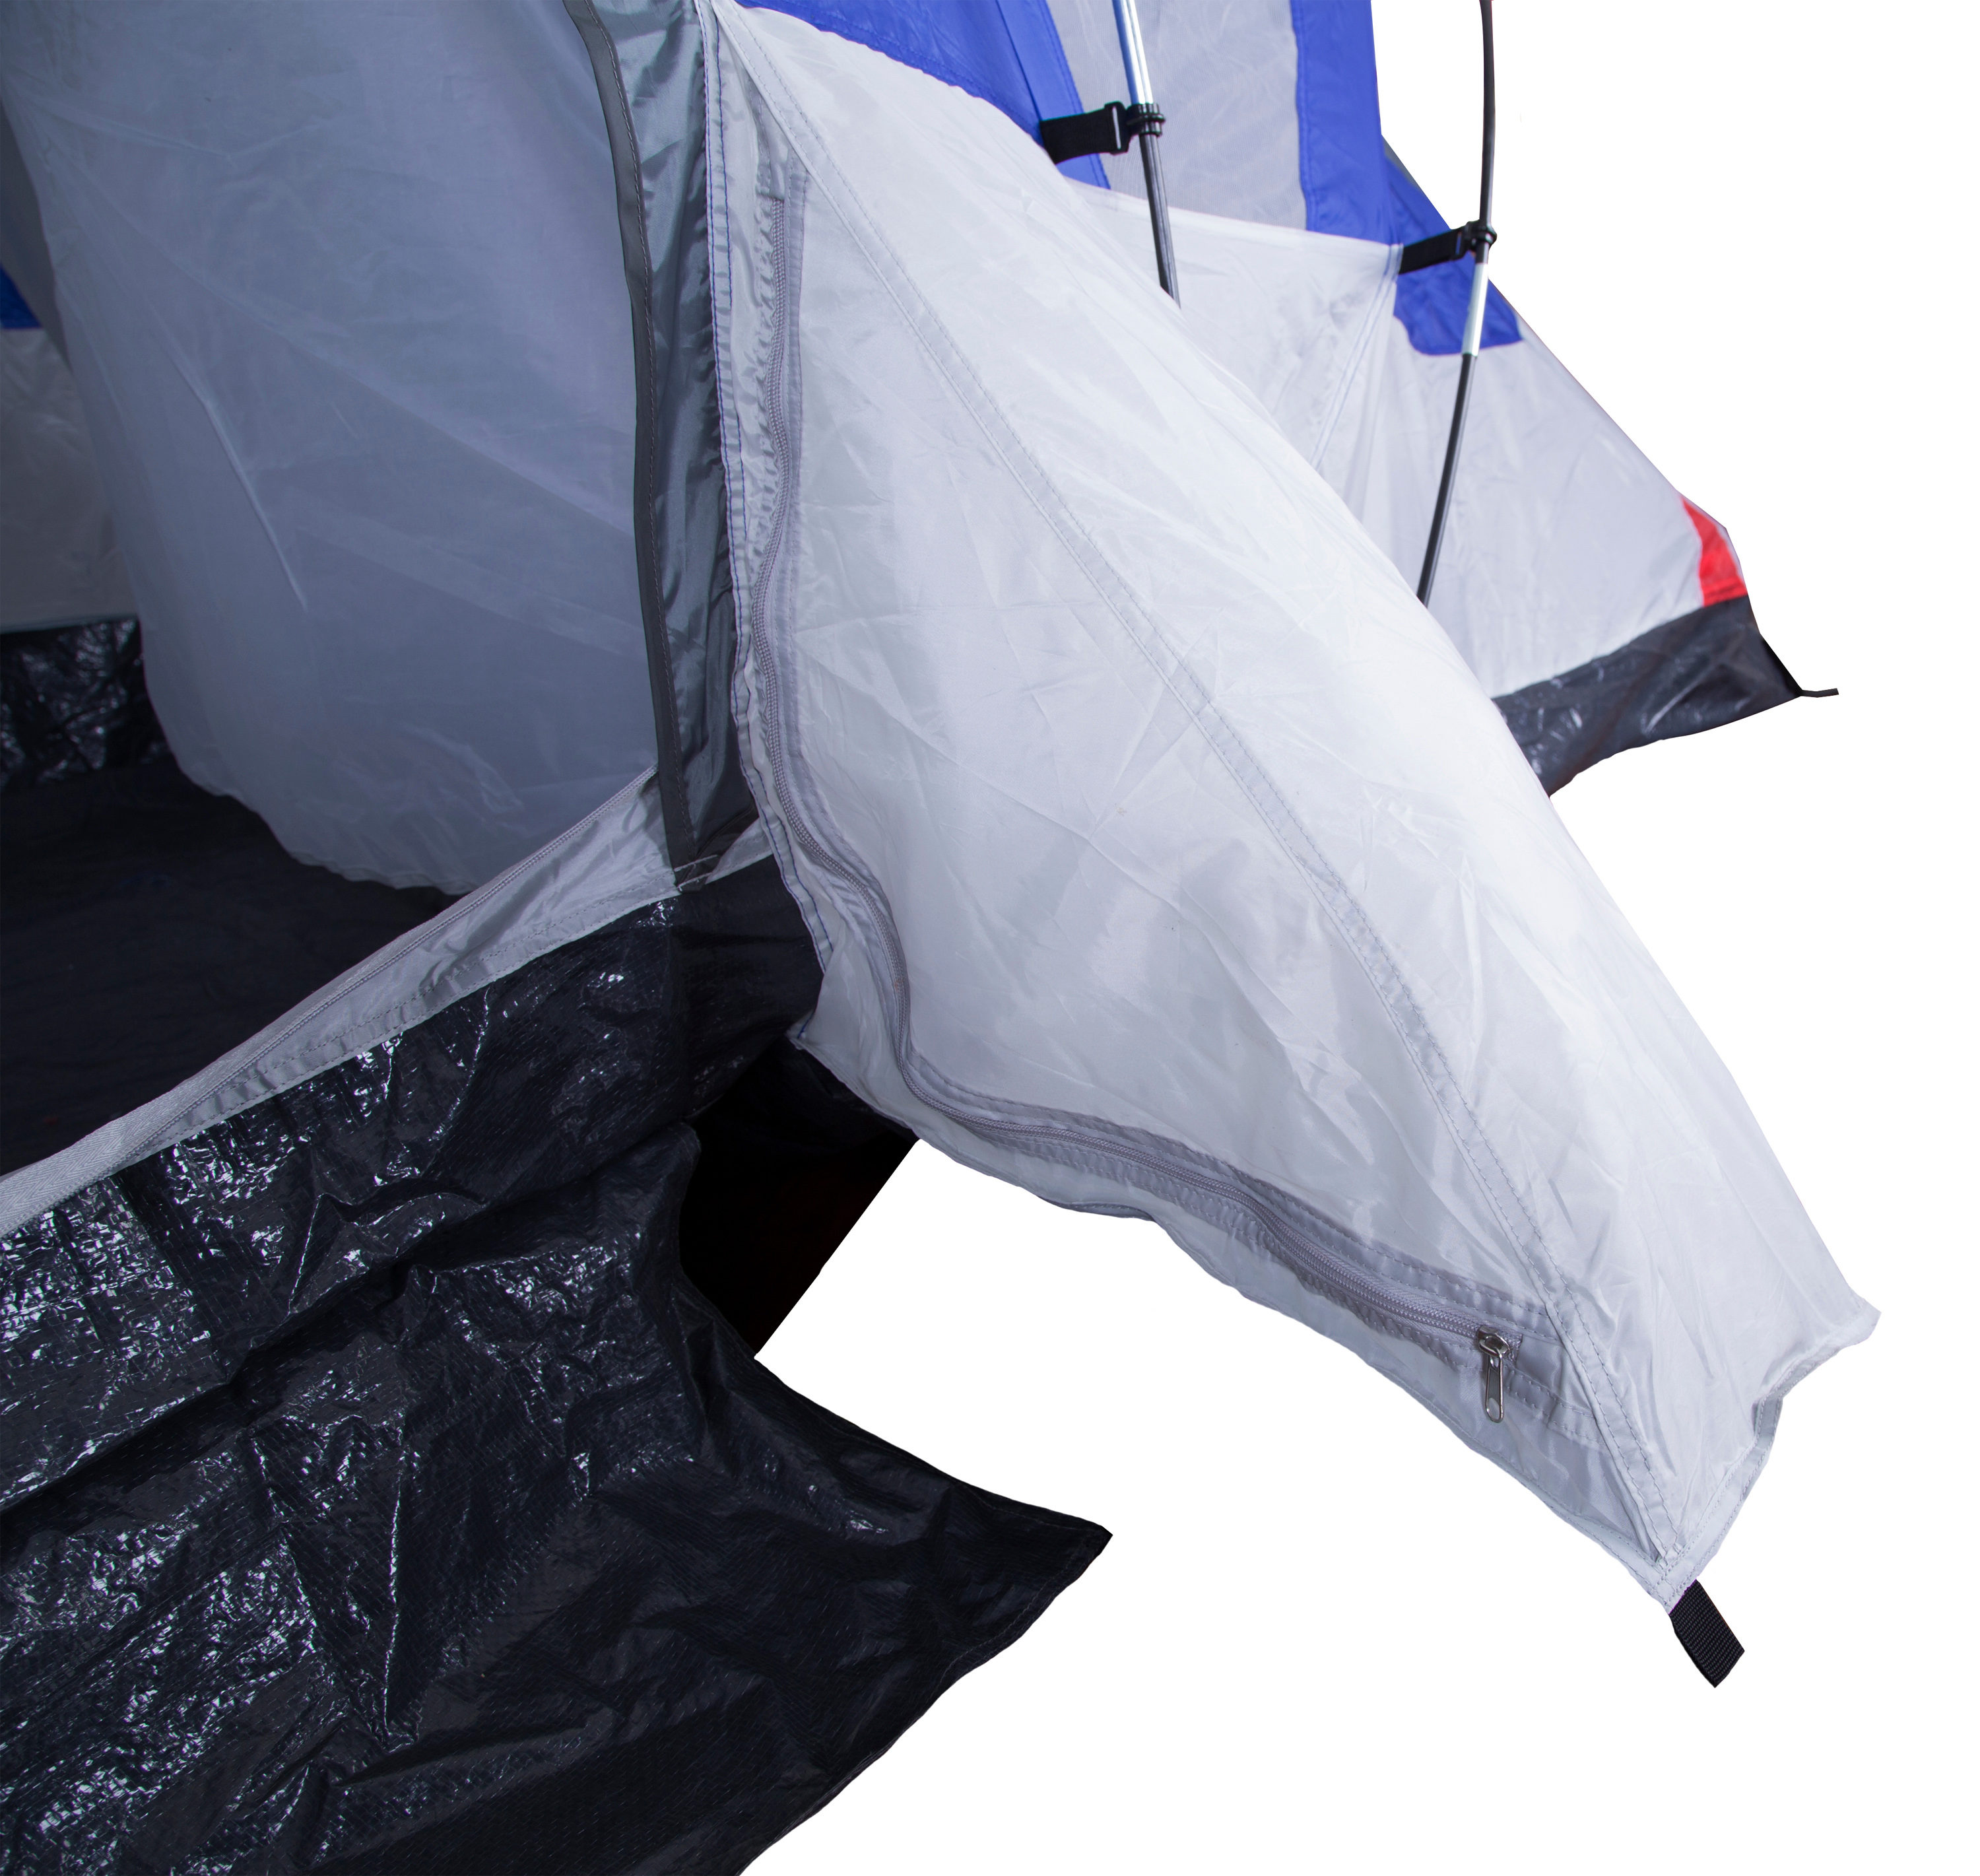 Stansport Polyester 8-Person Tent in the Tents department at Lowes.com